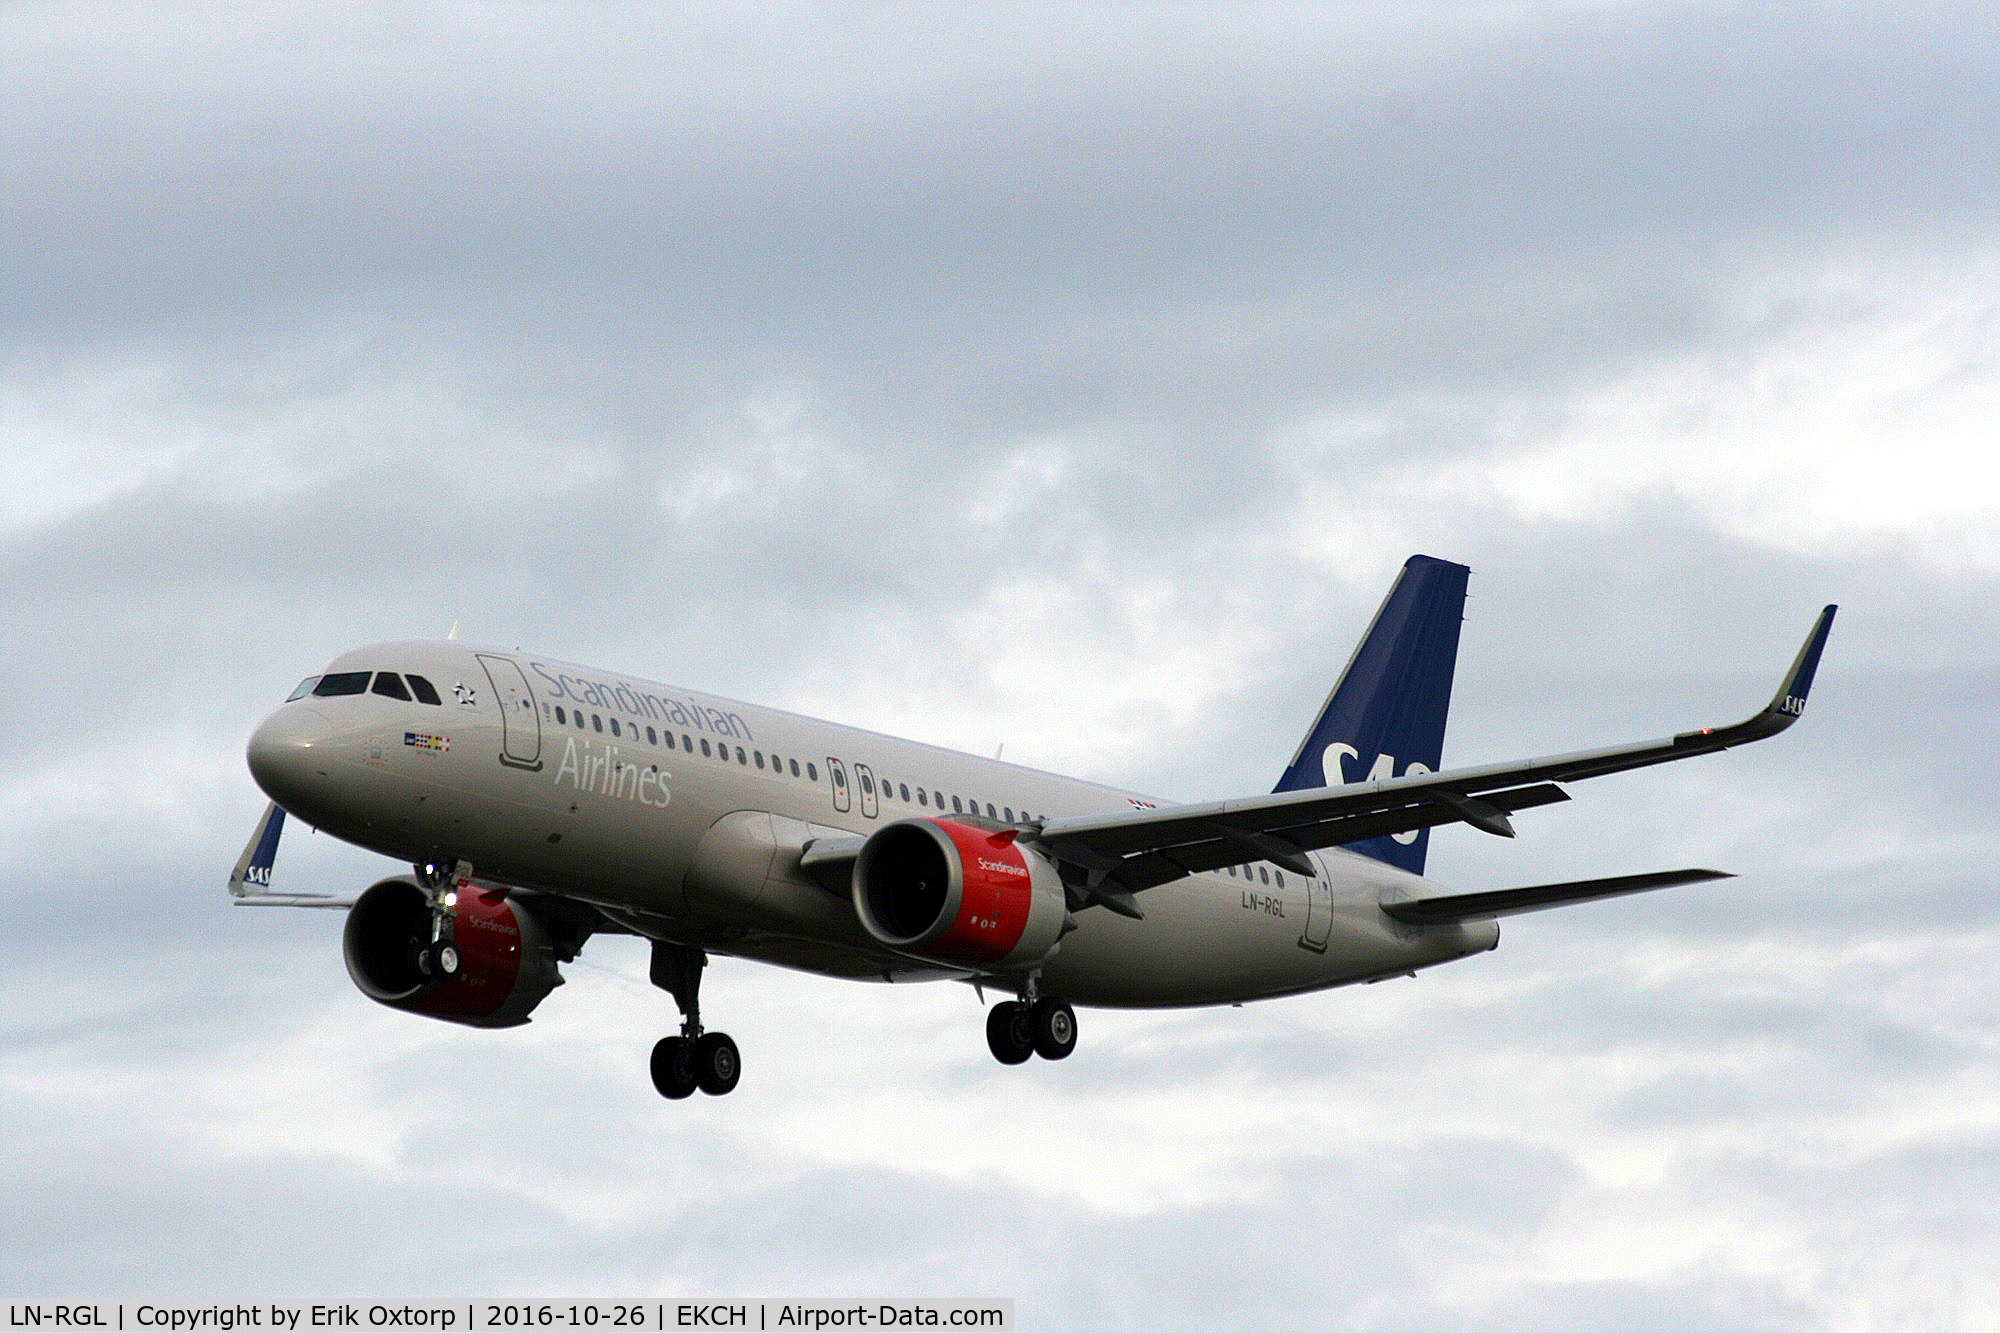 LN-RGL, 2016 Airbus A320-251NEO C/N 7290, LN.RGL landing after its second Commercial flight (SK403 from ARN).